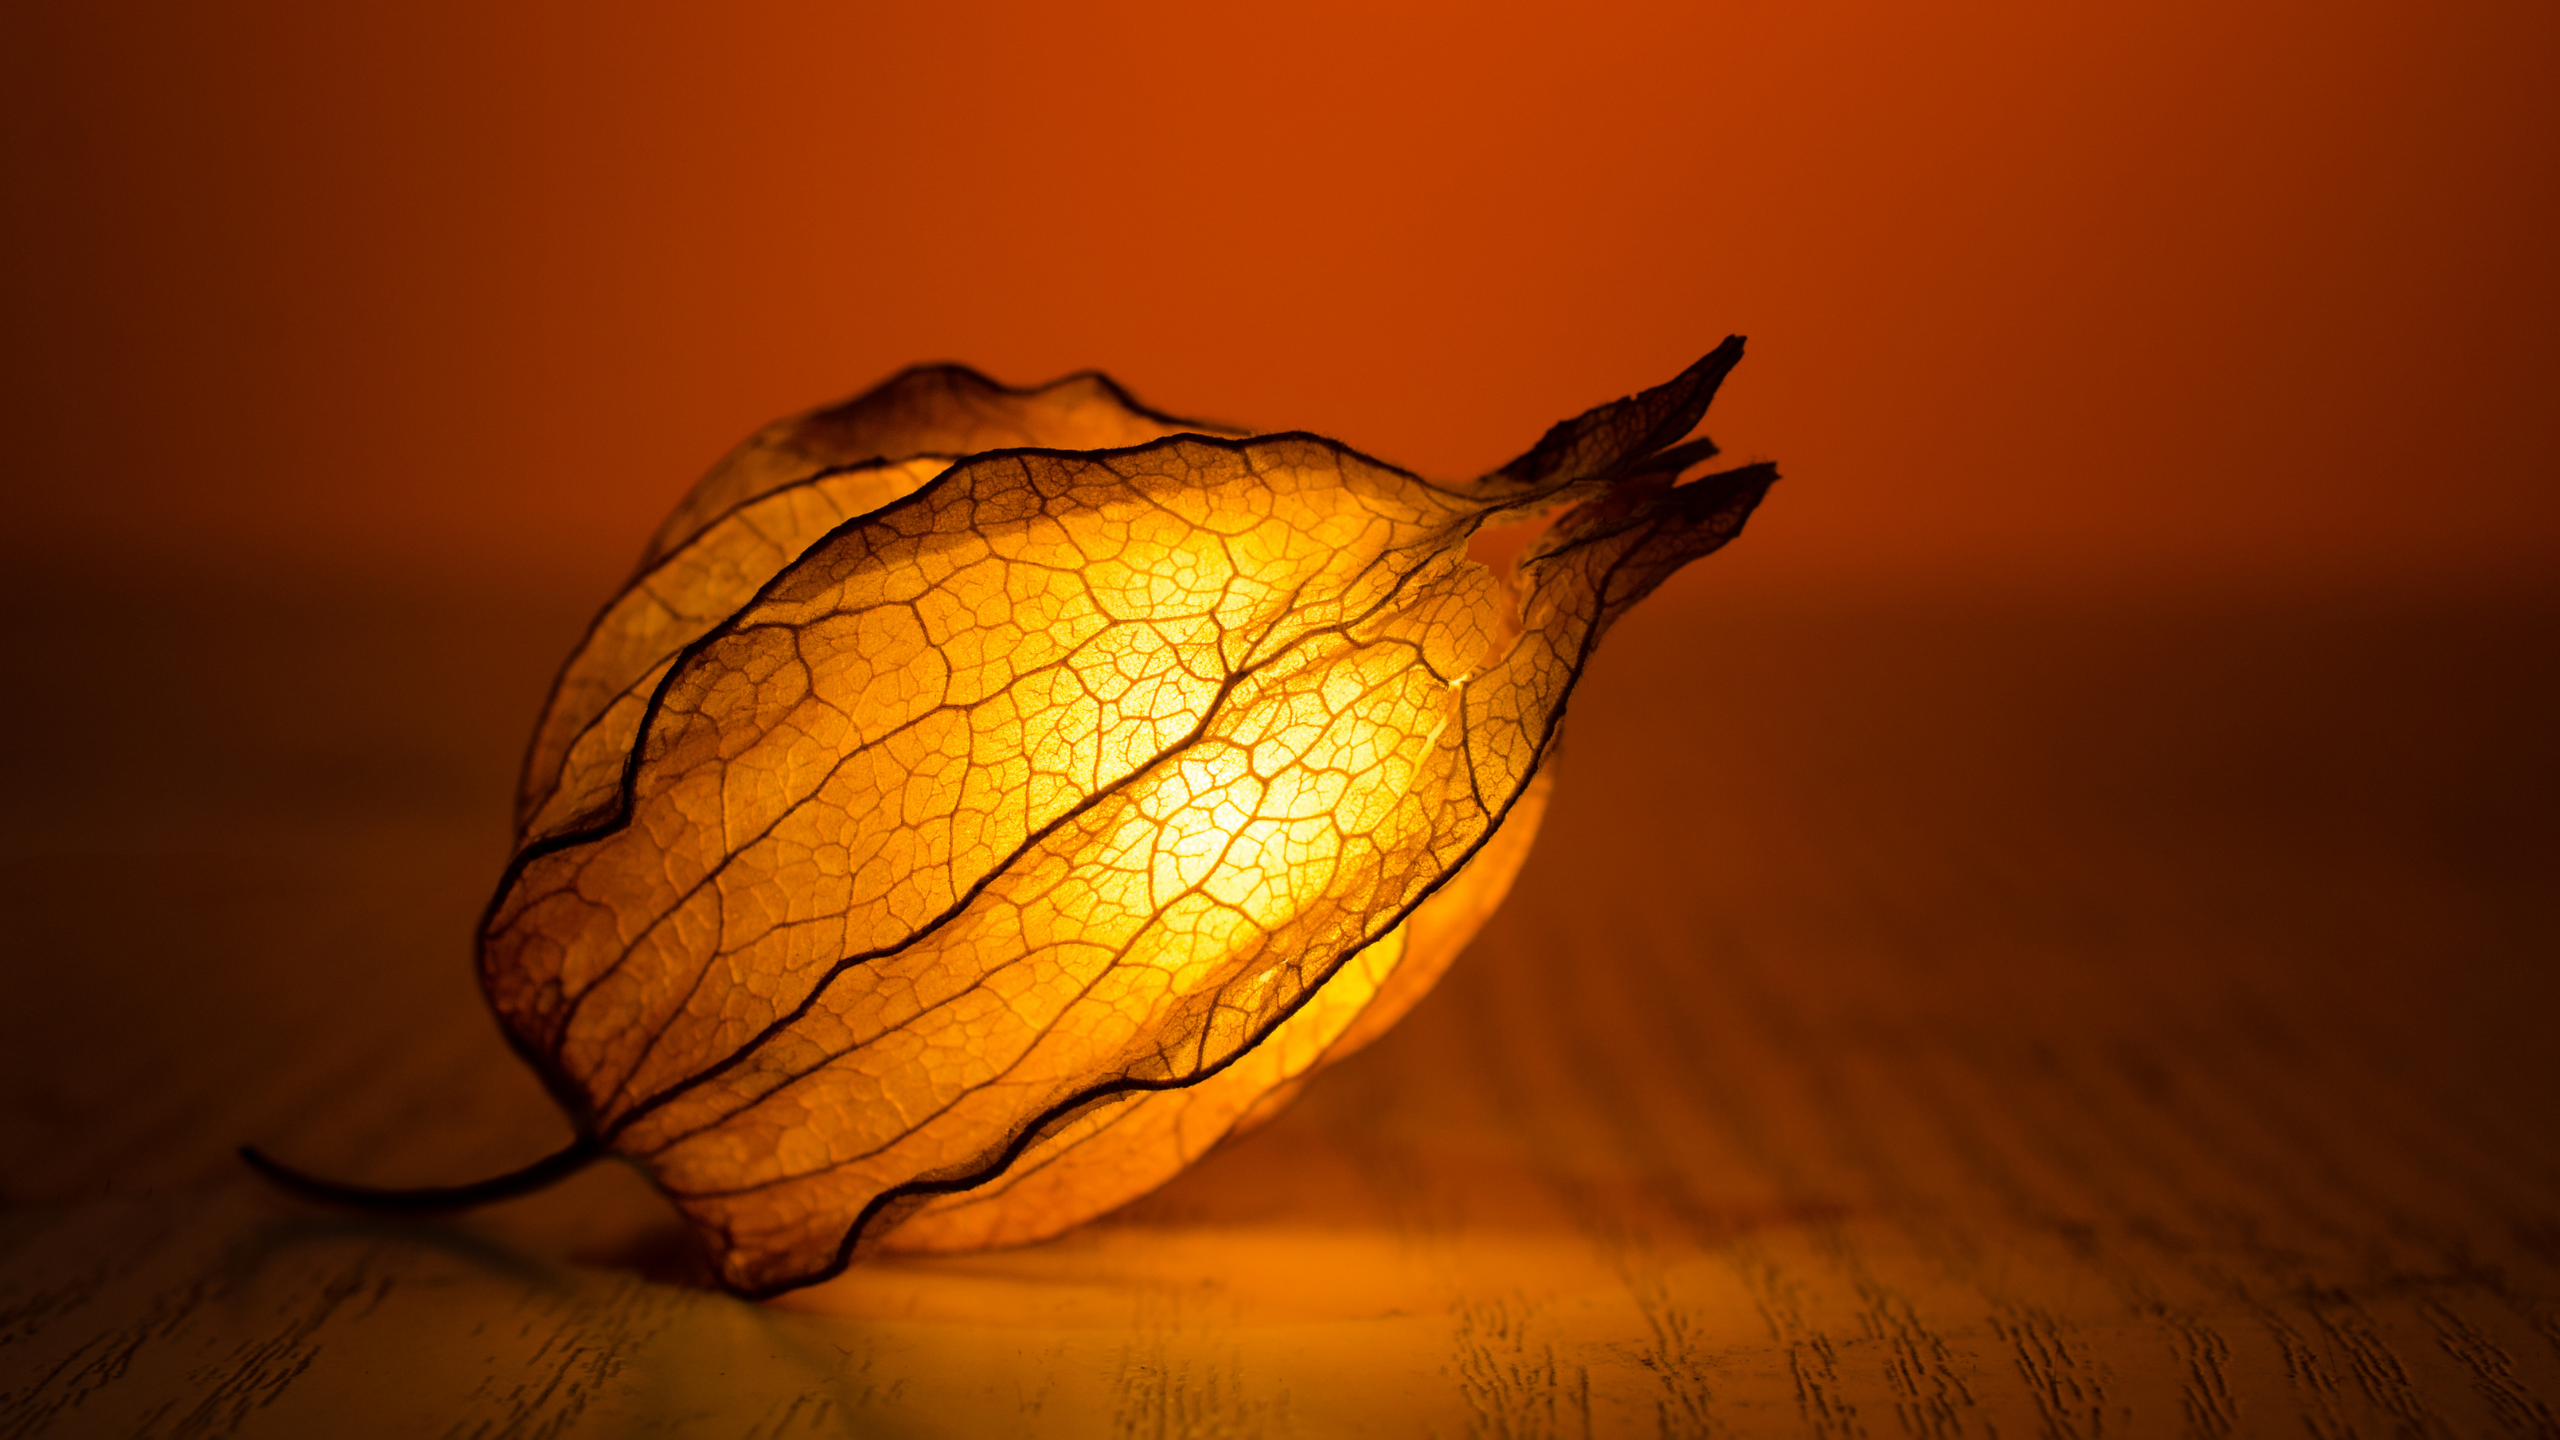 Burnt orange background with Cape Gooseberry in foreground, illuminated from within. Image is warm and intimate.